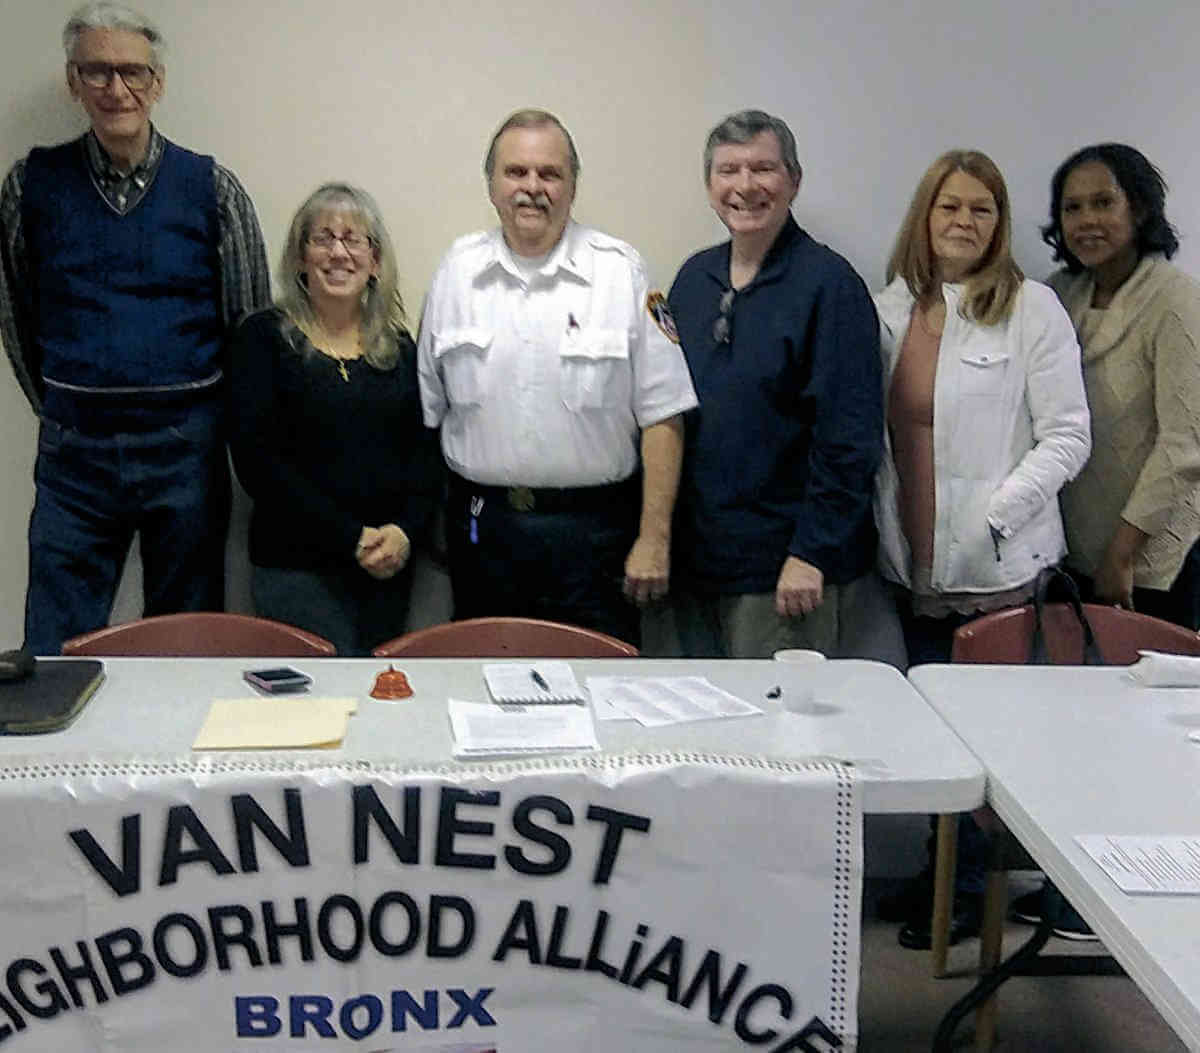 FDNY Home Safety Deputy Chief Attends VNNA Meeting